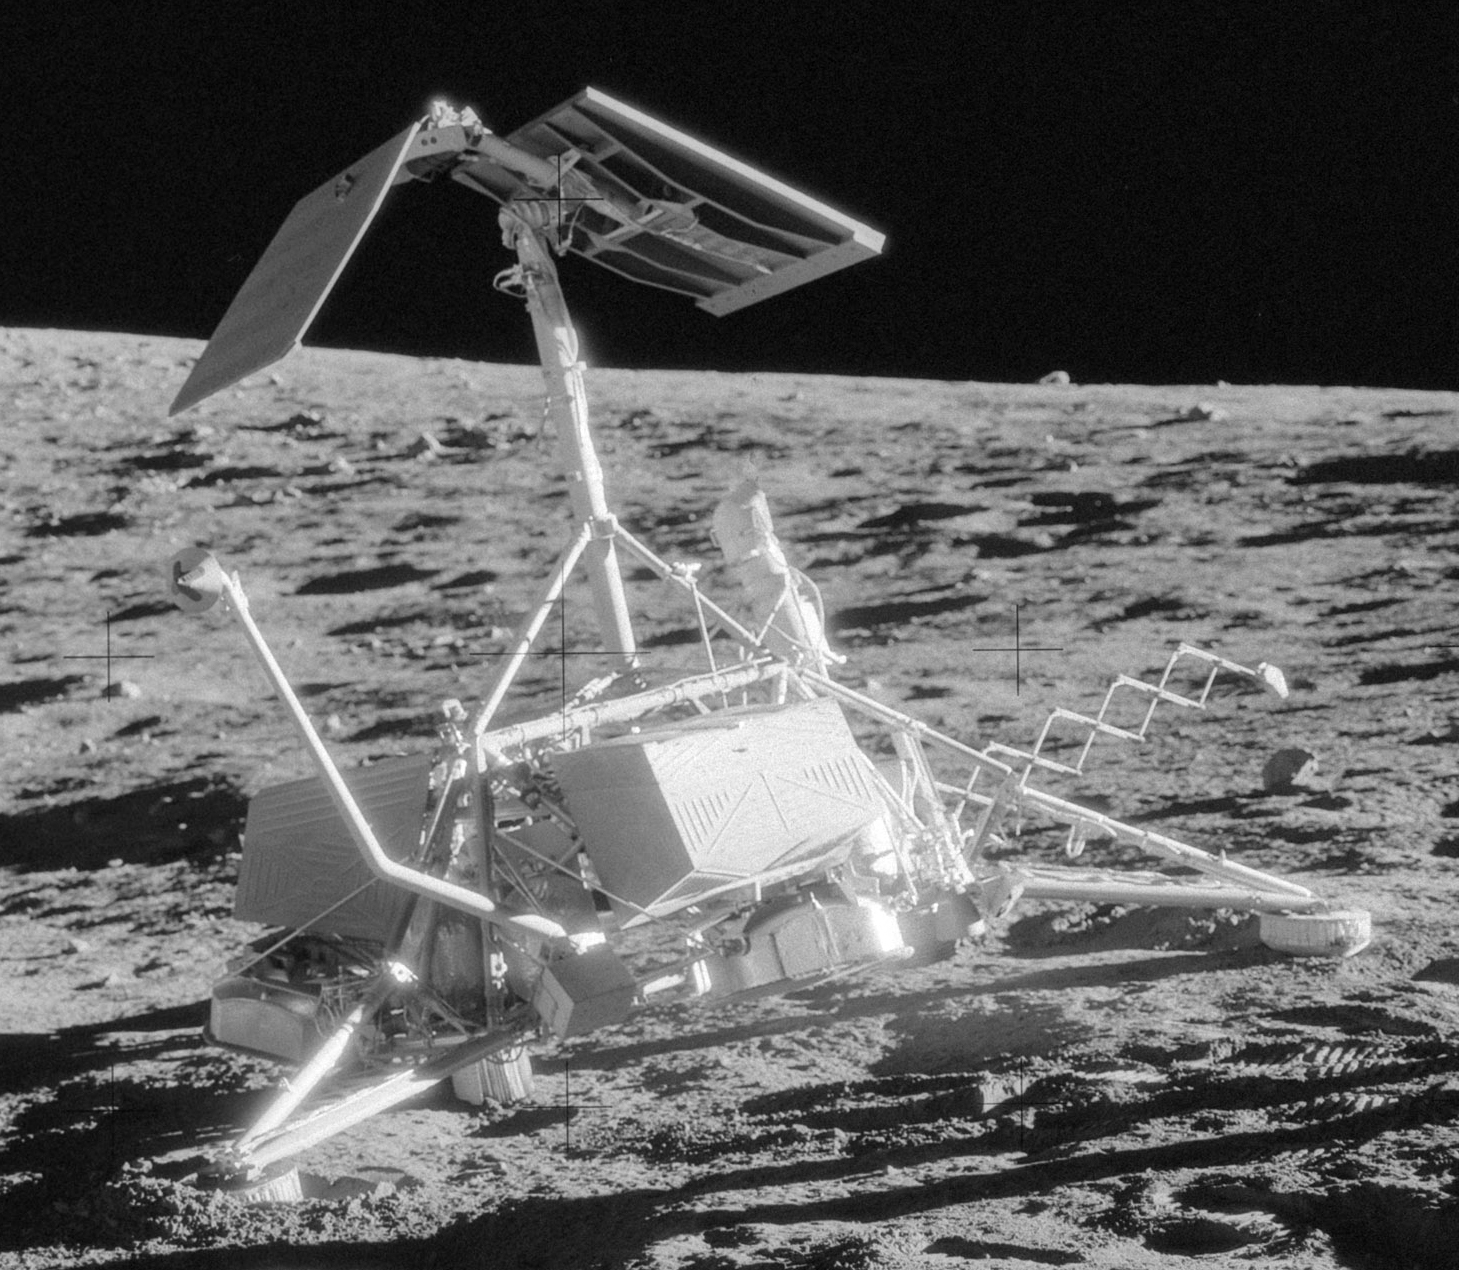 Surveyor 3 on the Moon photographed during a visit by Apollo 12 astronauts.